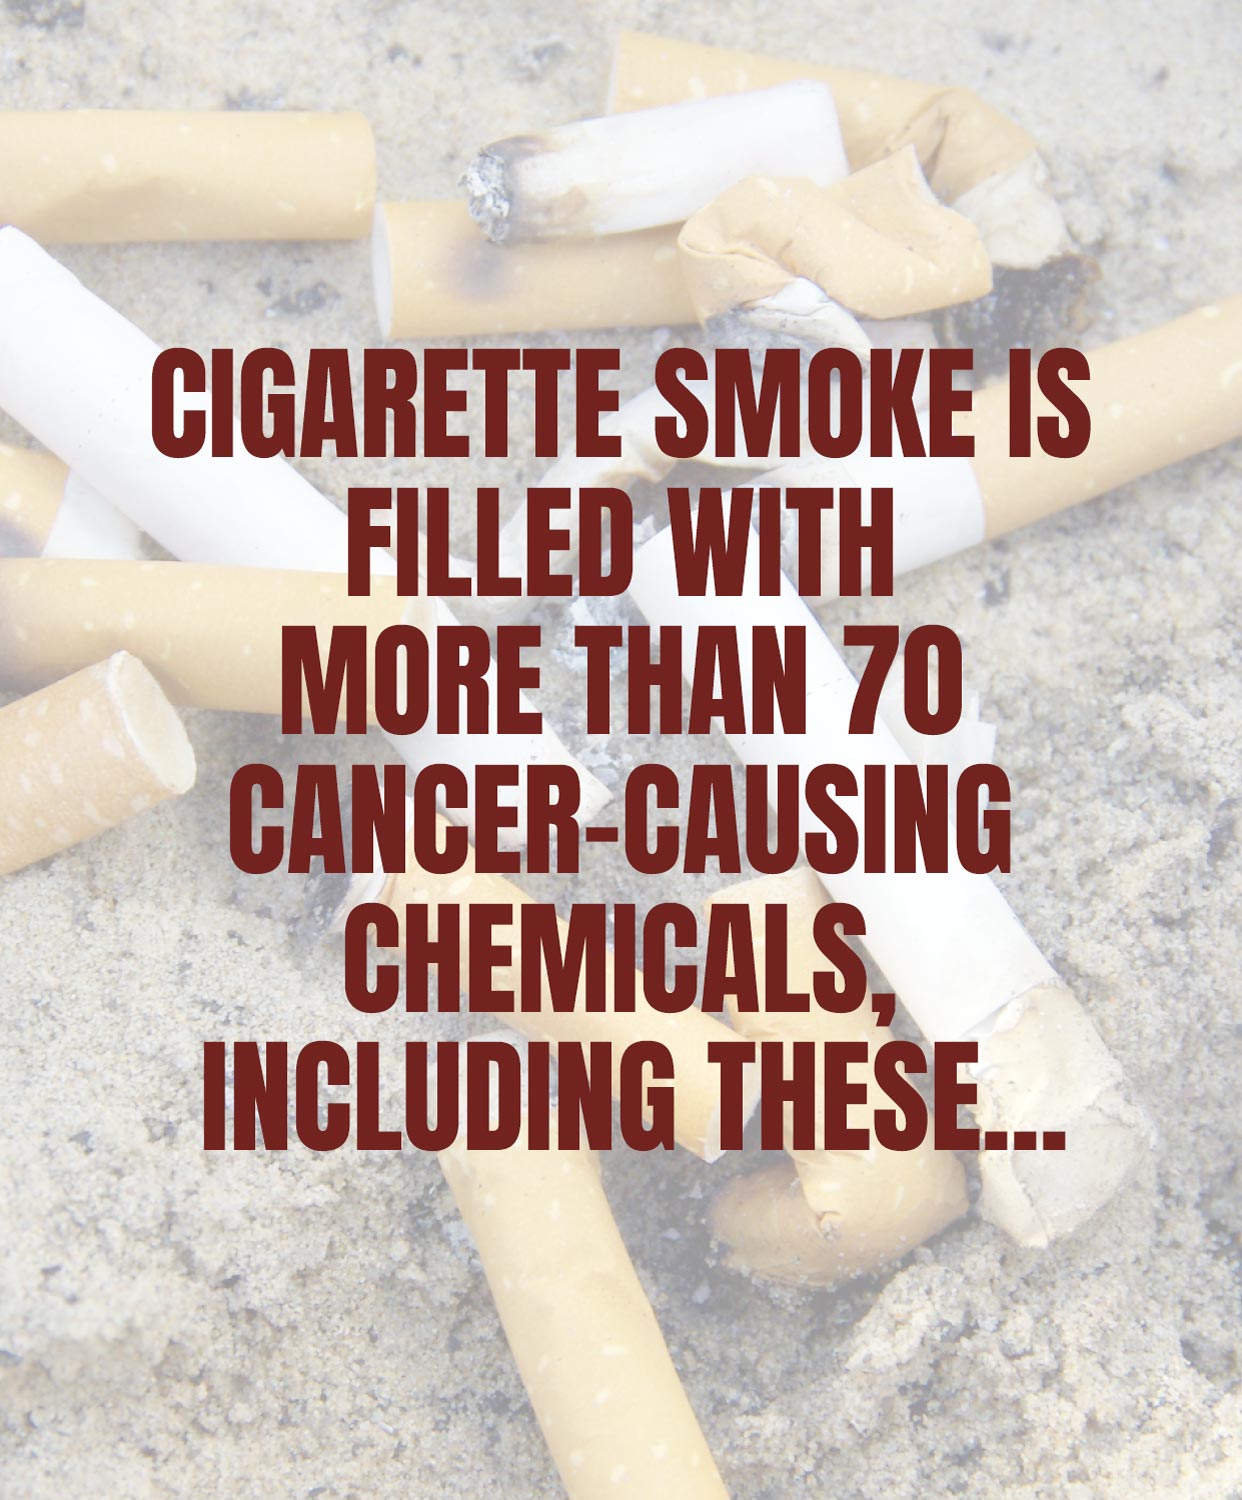 cigarette smoke is filled with more than 70 cancer causing chemicals including these